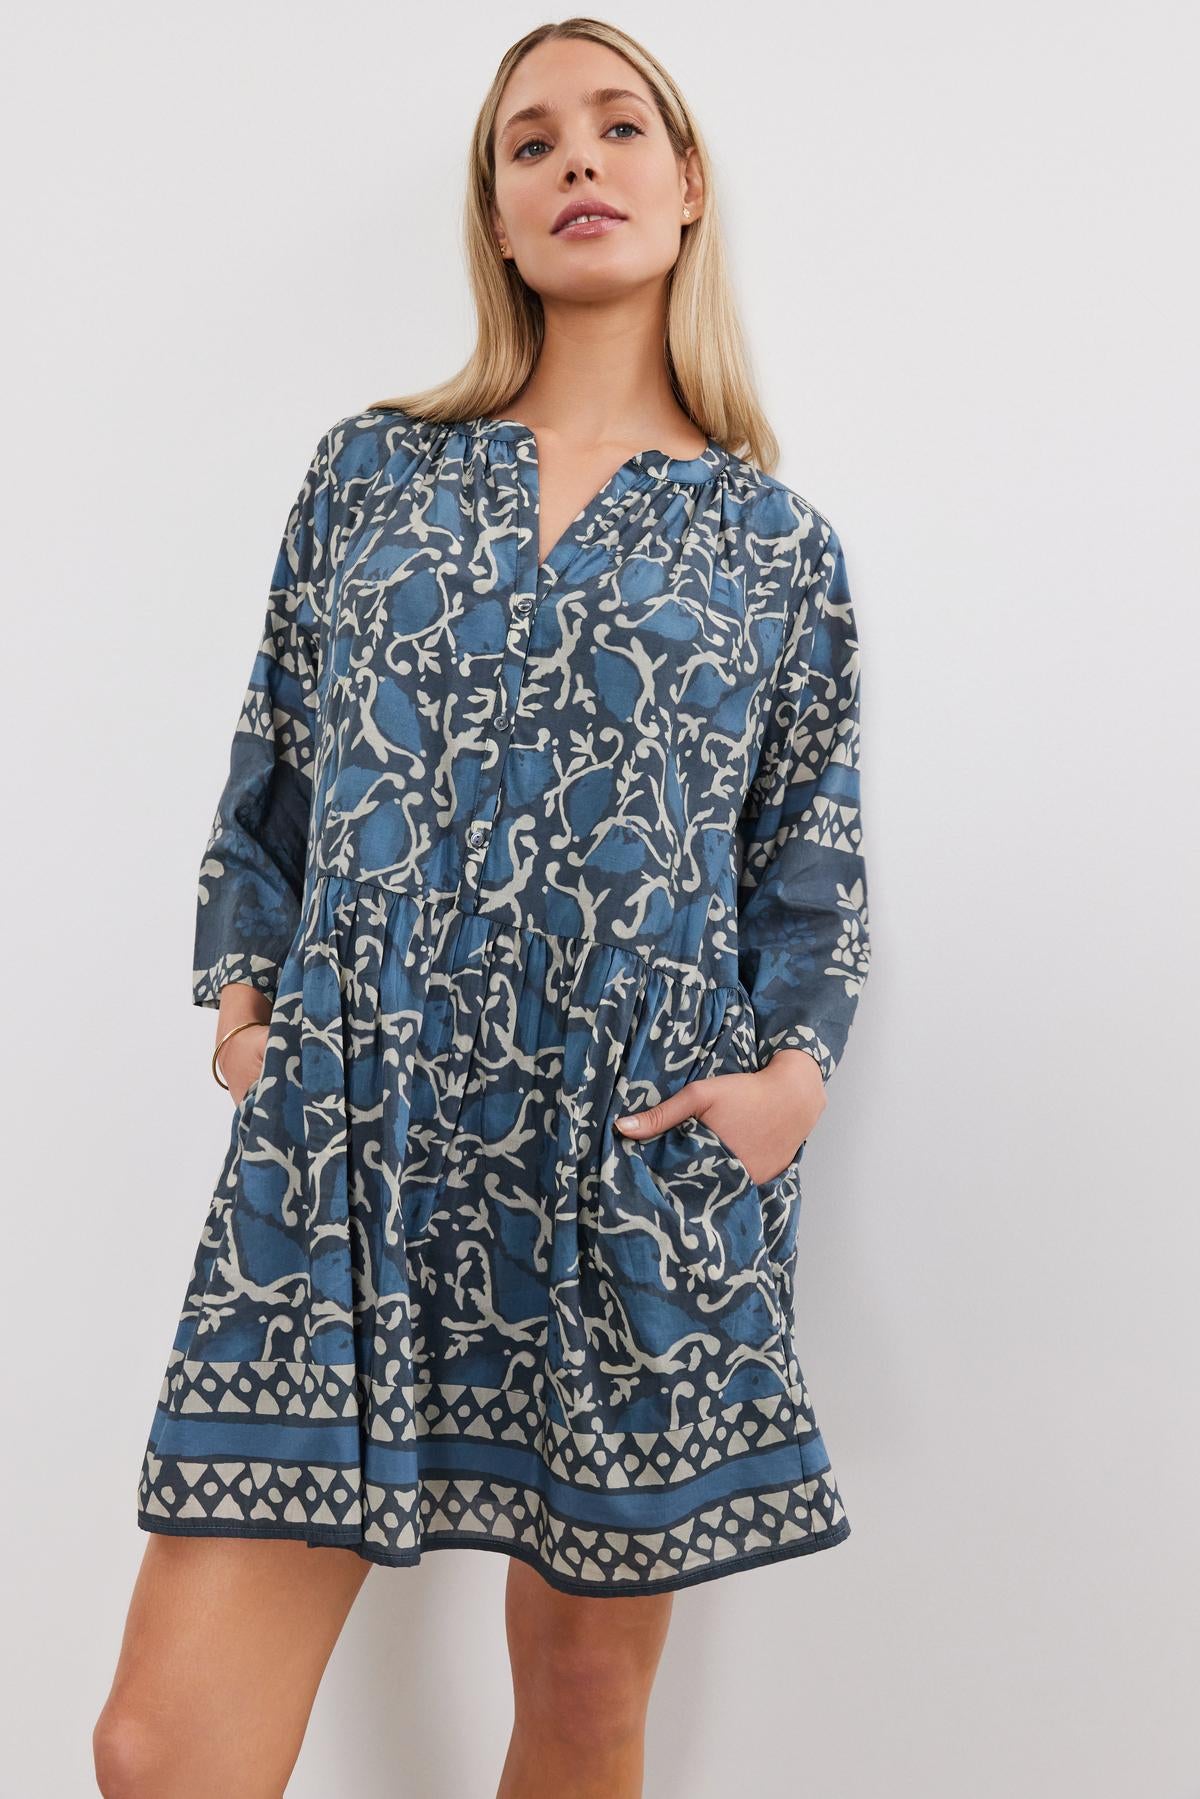   A woman wearing a blue and white patterned split neck Talia dress with long sleeves, standing against a white background by Velvet by Graham & Spencer. 